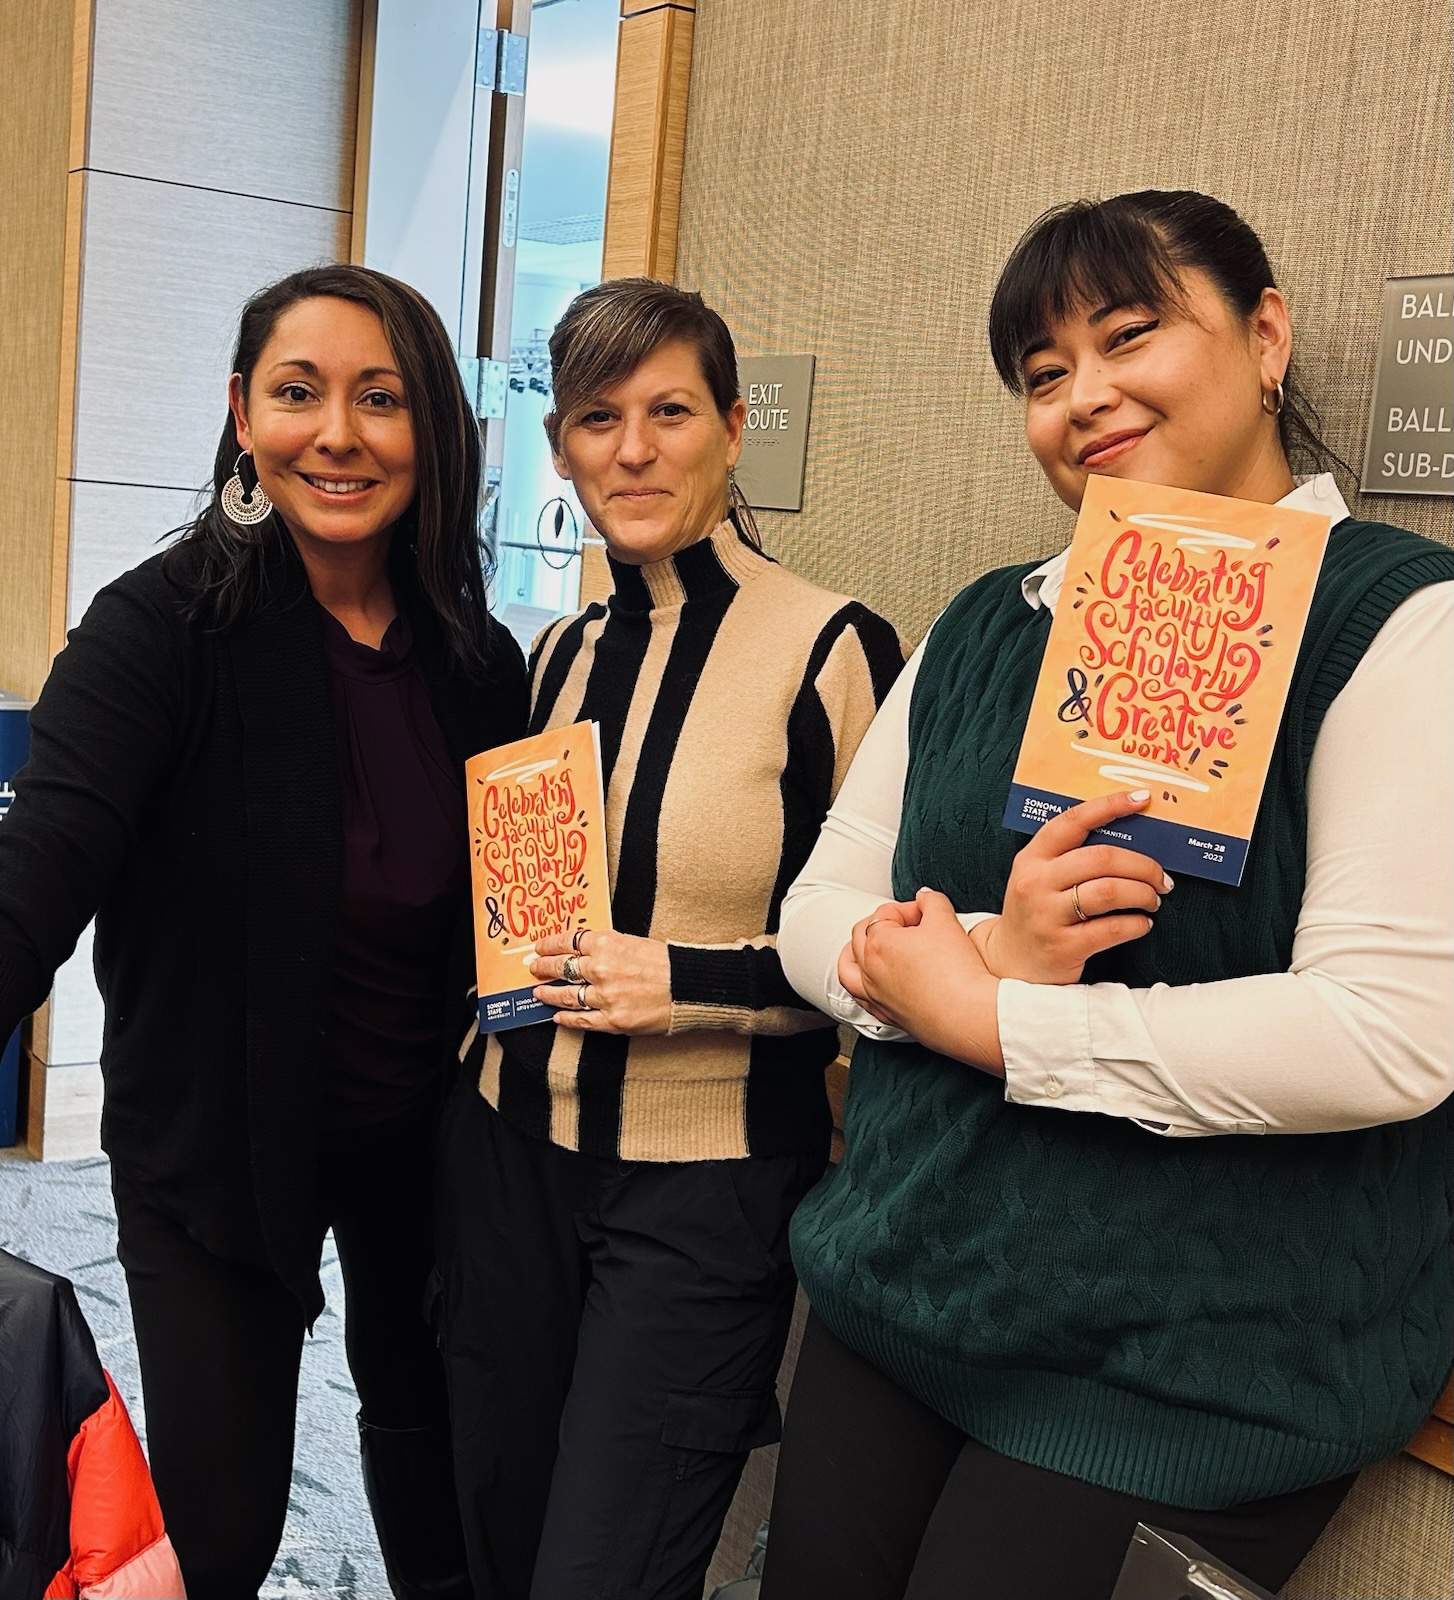 Marie Ramirez Downing, Christine Cali, and Farrah McAdam holding programs for "Celebrating Faculty Scholarly Creative Work!" event